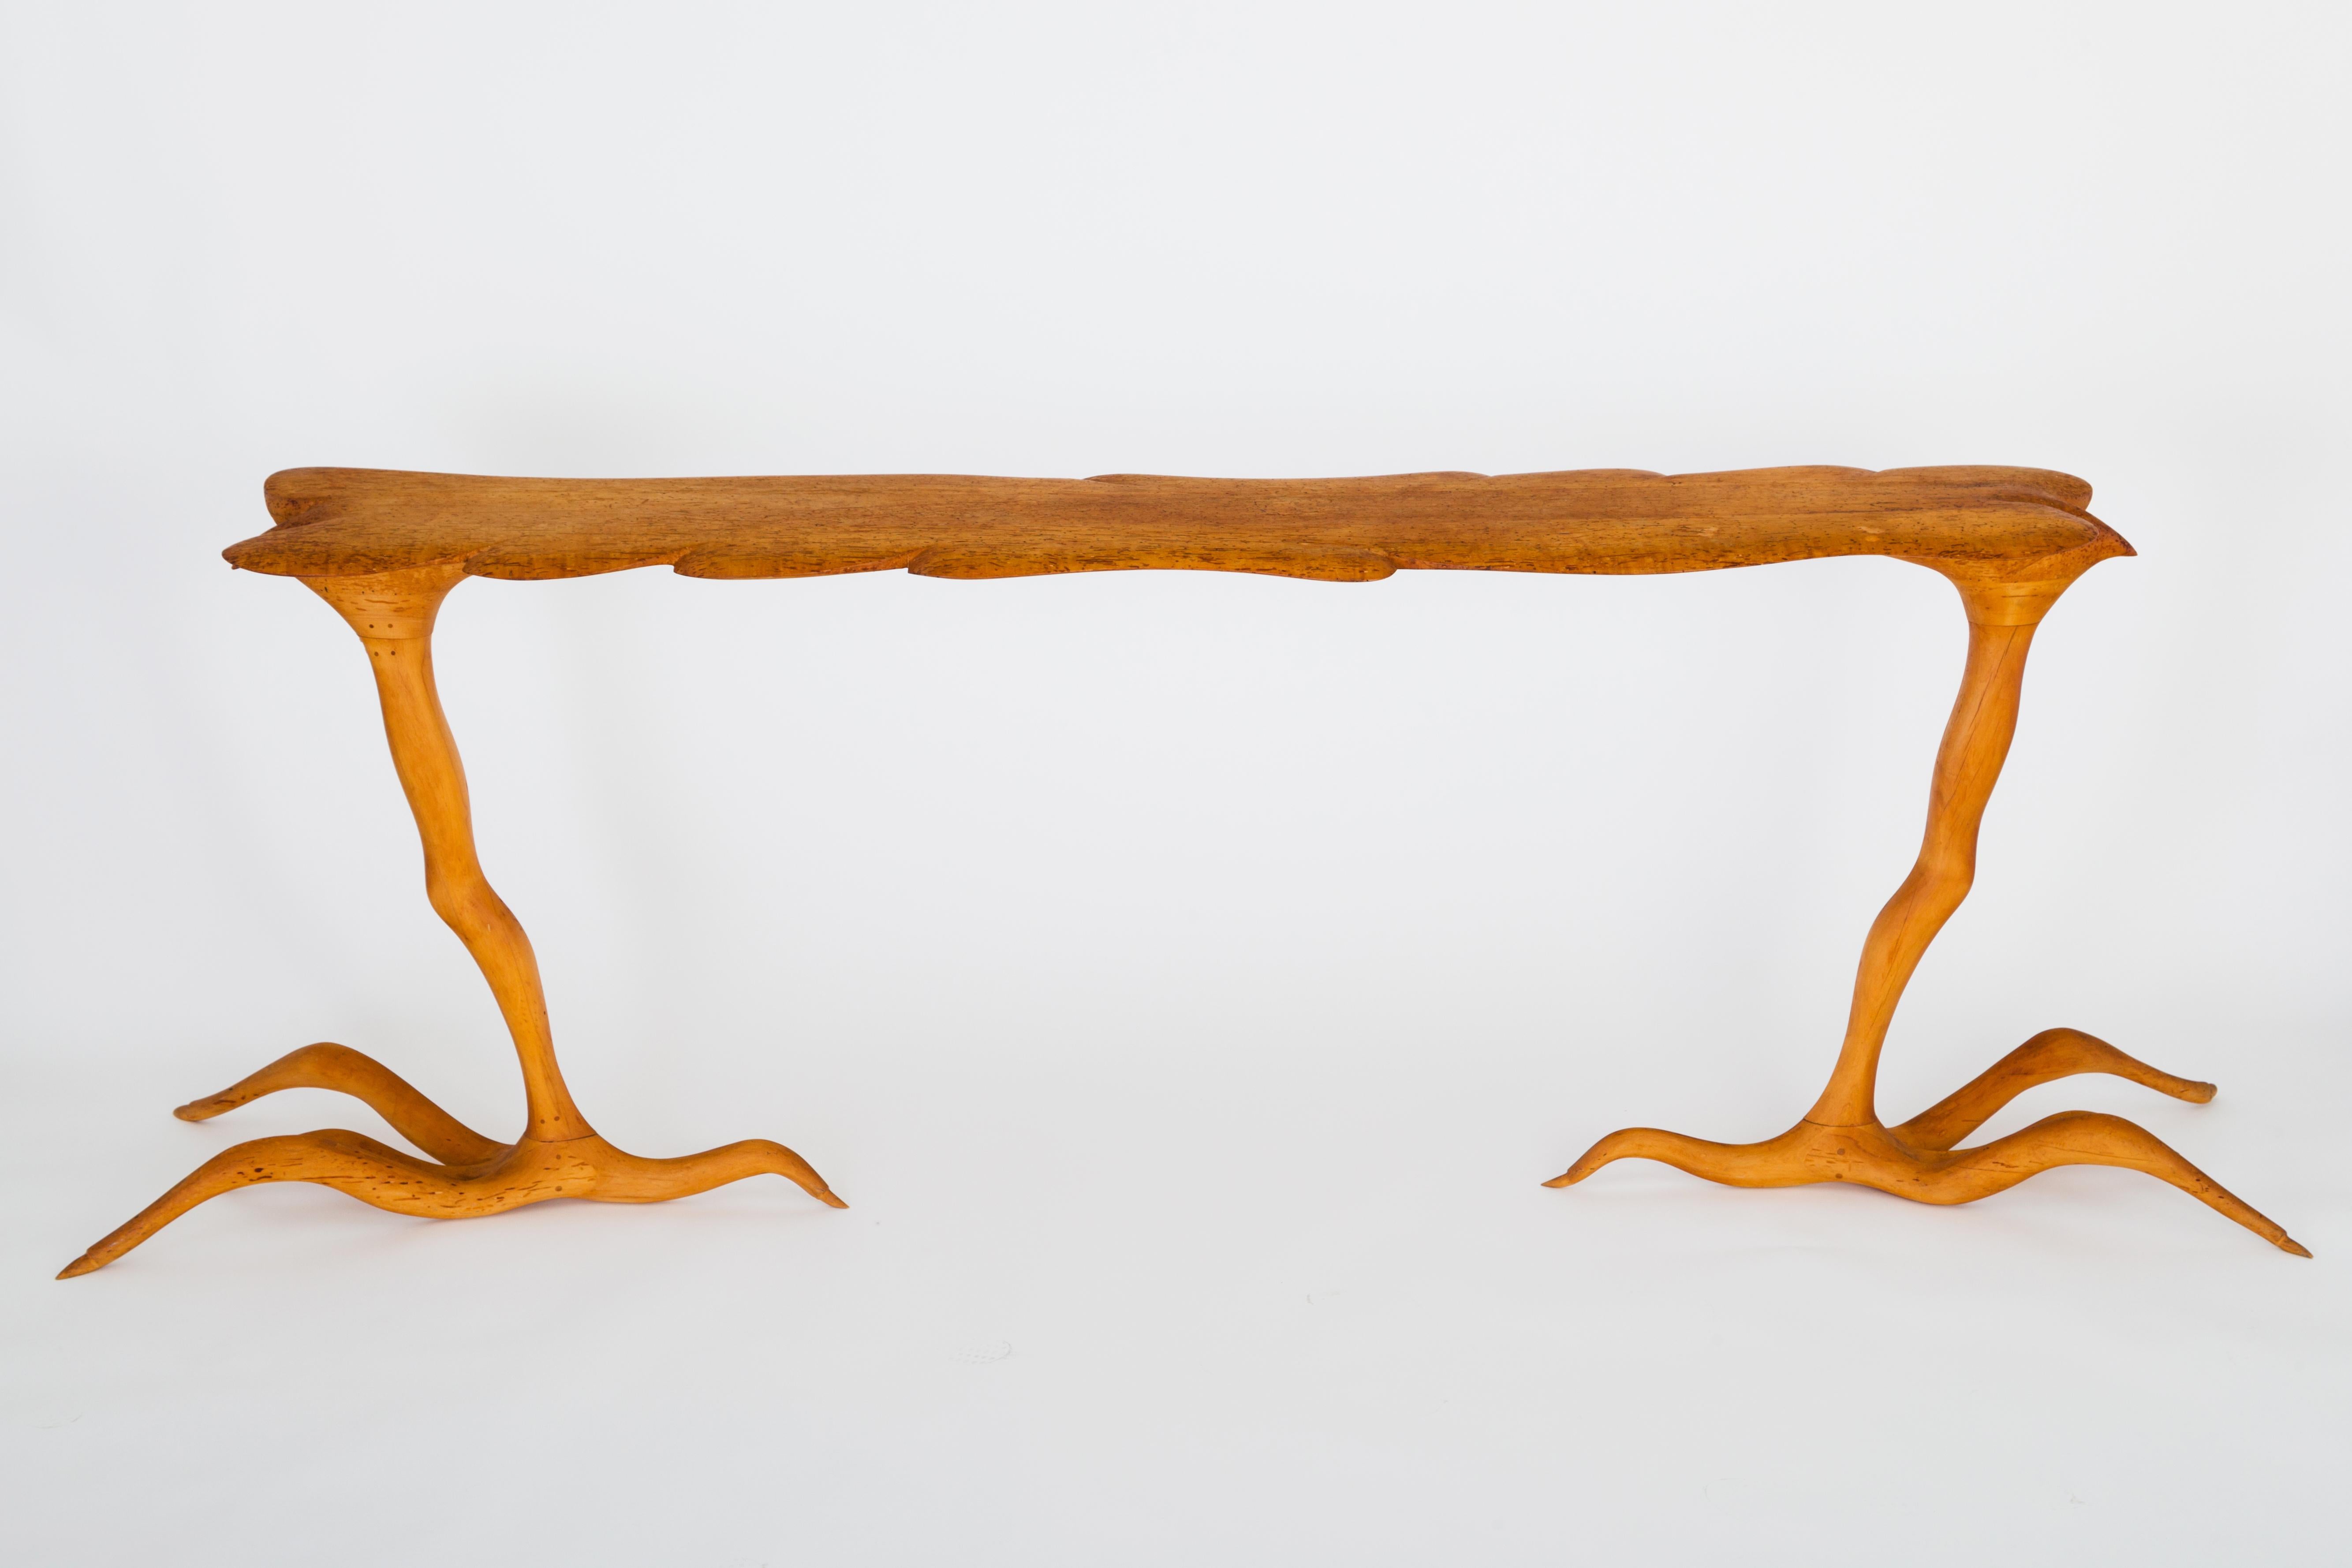 A one-off, fantastical table by American craftsman, Andrew J Willner, executed in rare, spalted wormy maple, its five individual sections sculpted by hand and constructed with pegged mortise and tenon joinery.  A dramatic pair of legs that are an